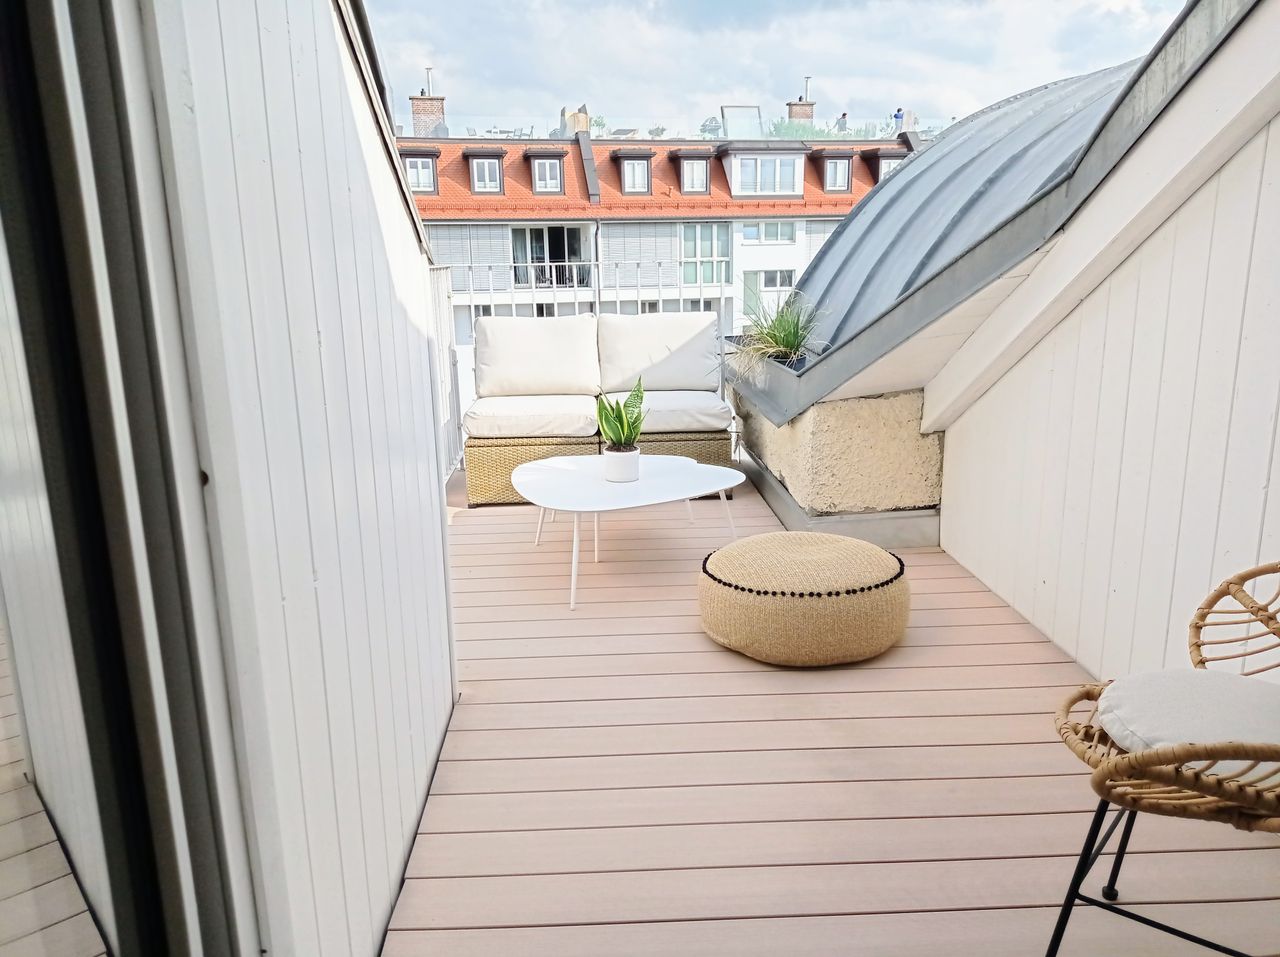 Top location! Bright 3 room flat with roof top terrace